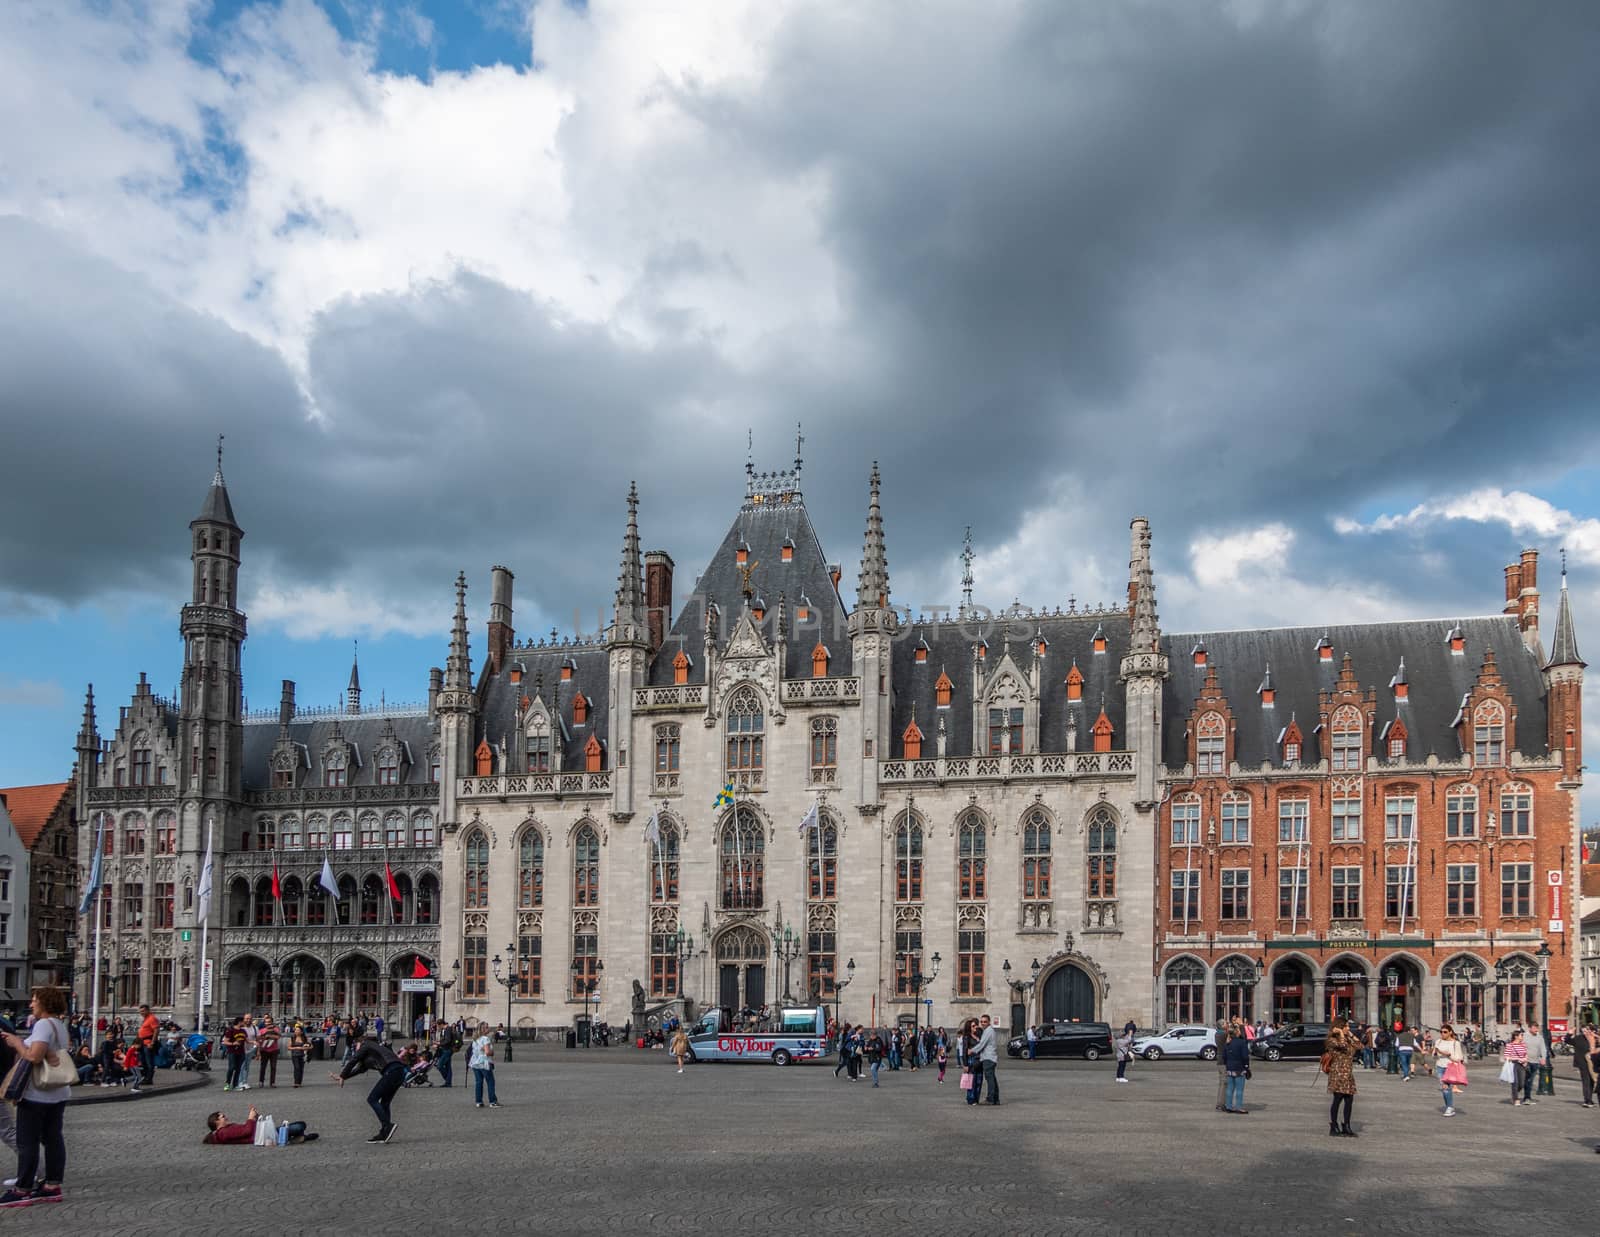 Bruges, Flanders, Belgium -  June 15, 2019: Facades of NE side of Markt square under heavy cloudscape. People in front. Buildings include Provincial Court in center and Historium on left.